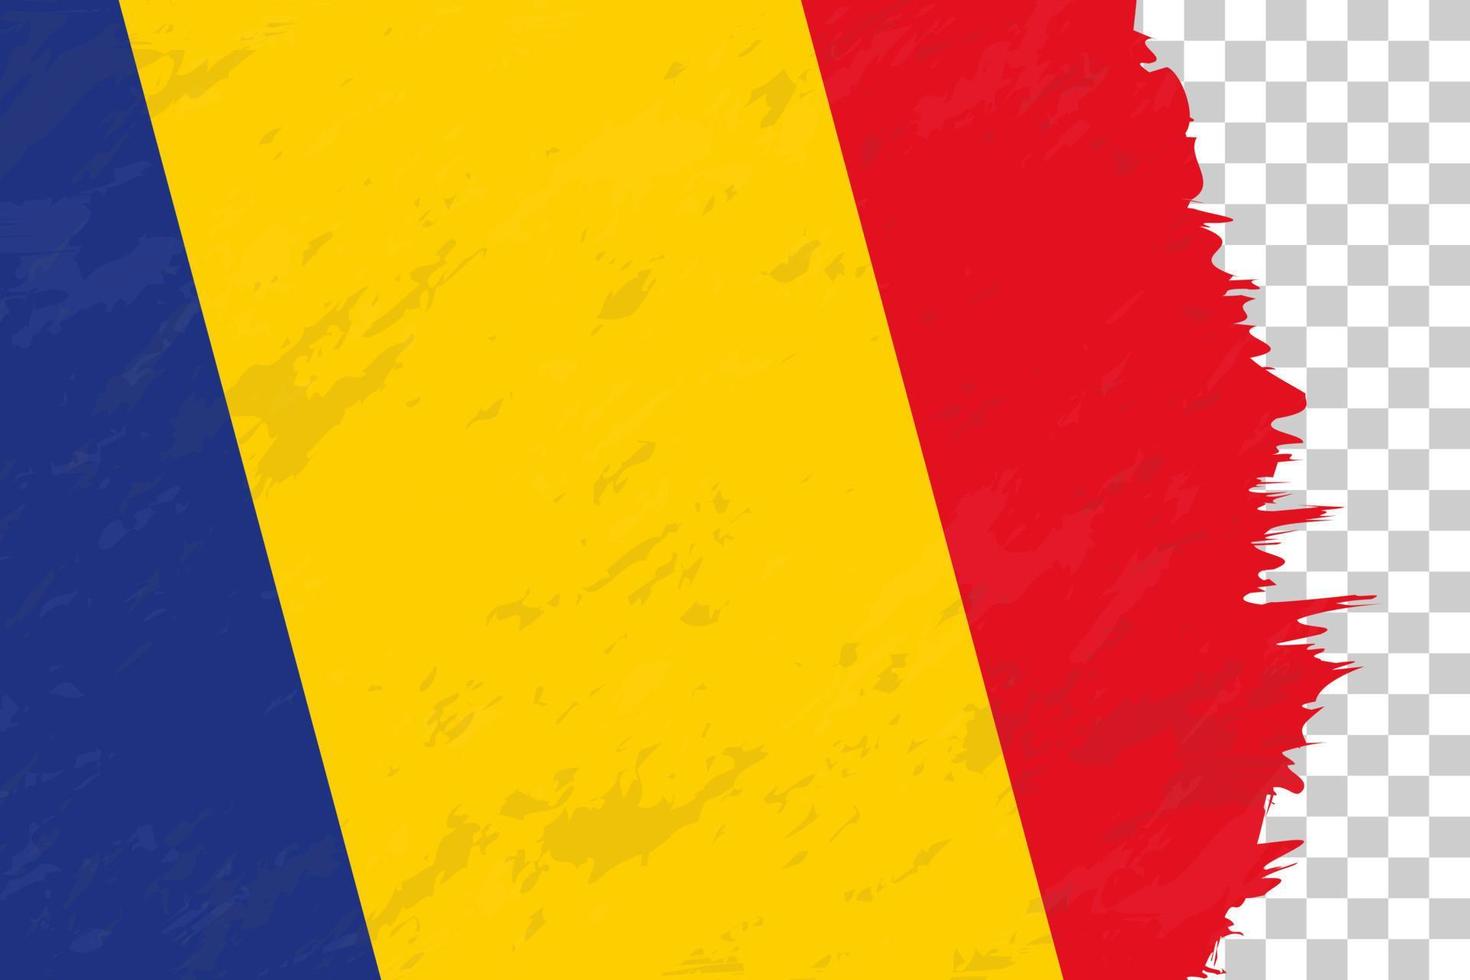 Horizontal Abstract Grunge Brushed Flag of Romania on Transparent Grid. vector